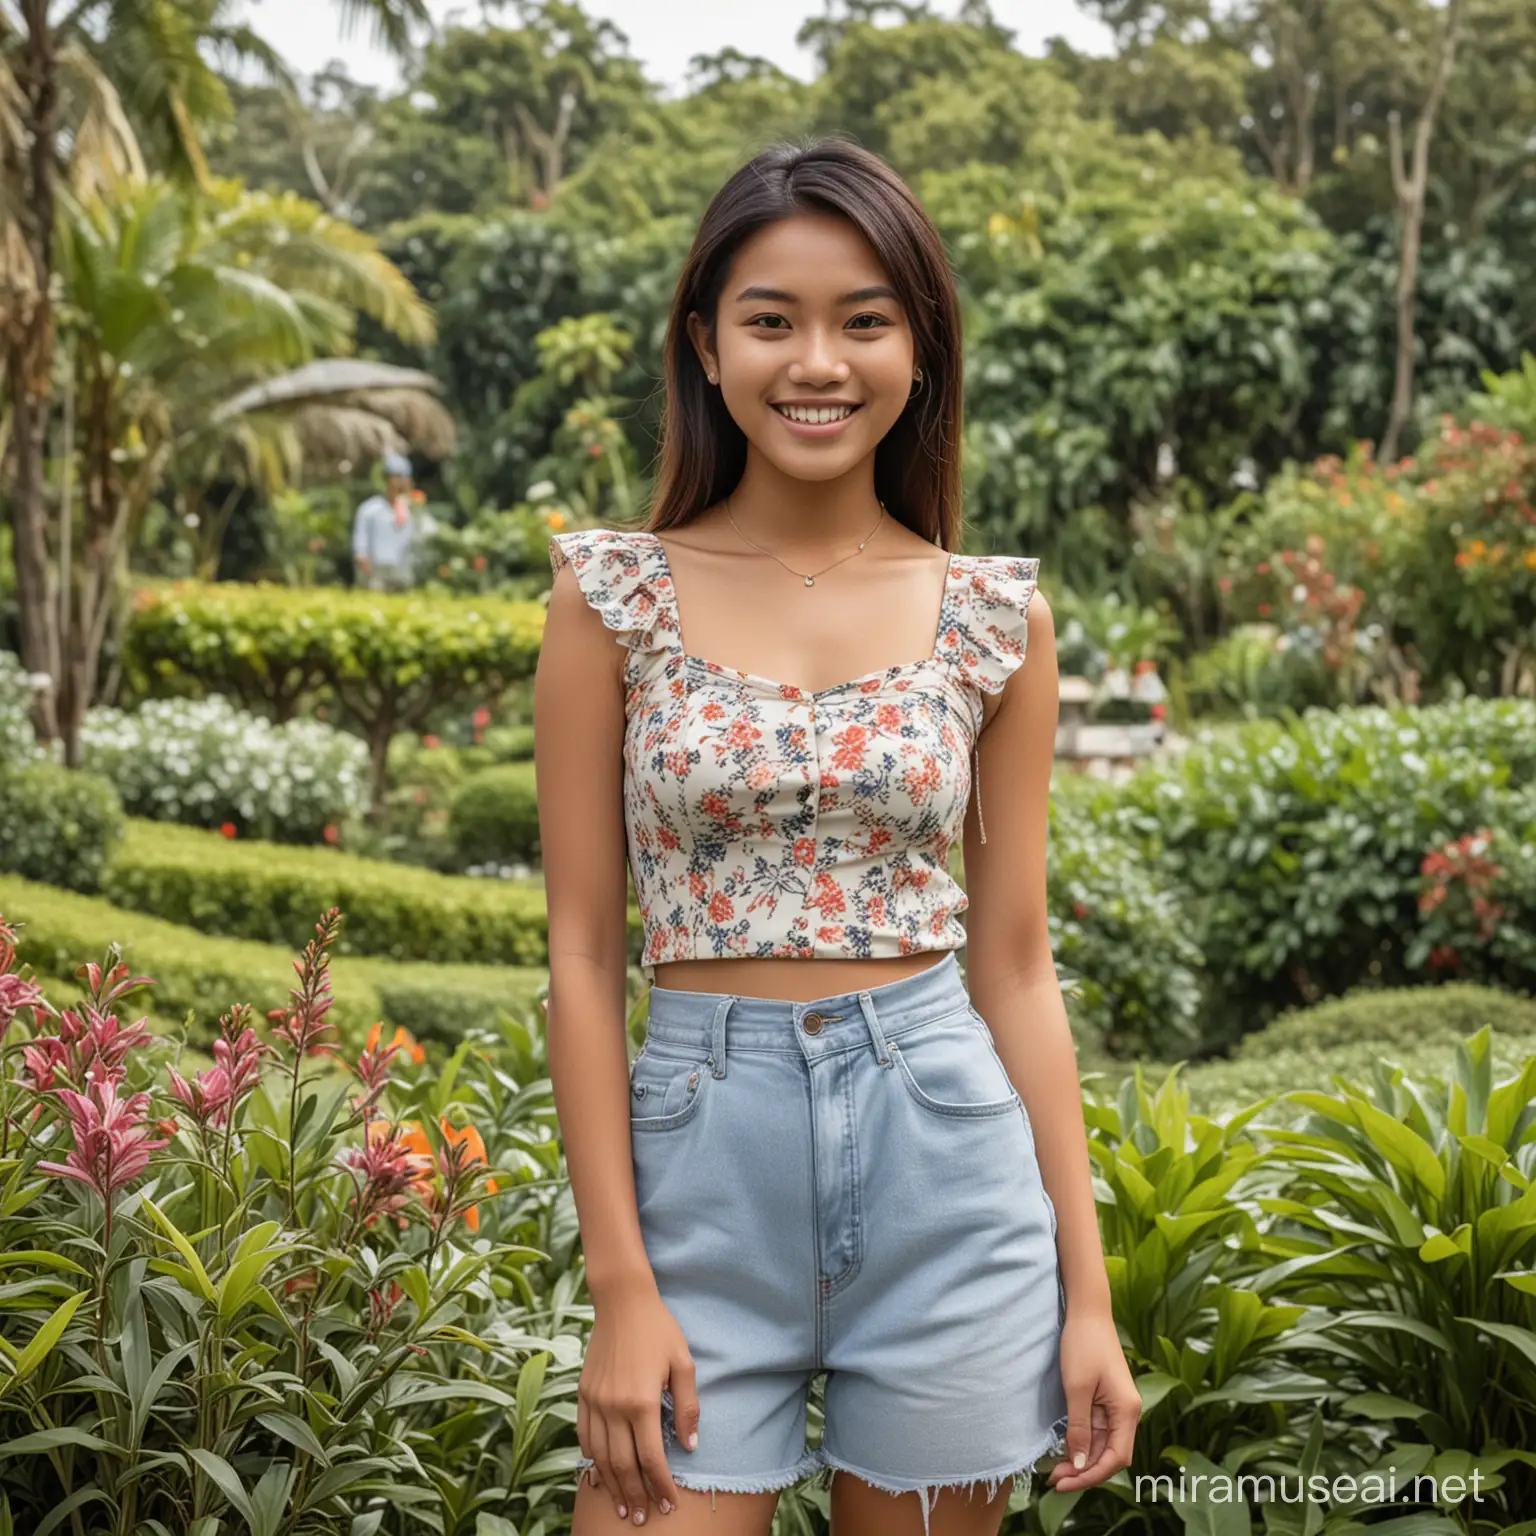 a very beautiful Indonesian teenager aged 21 years, standing wearing a contemporary mix and match celebgram style, posing smiling, tea garden in the background.